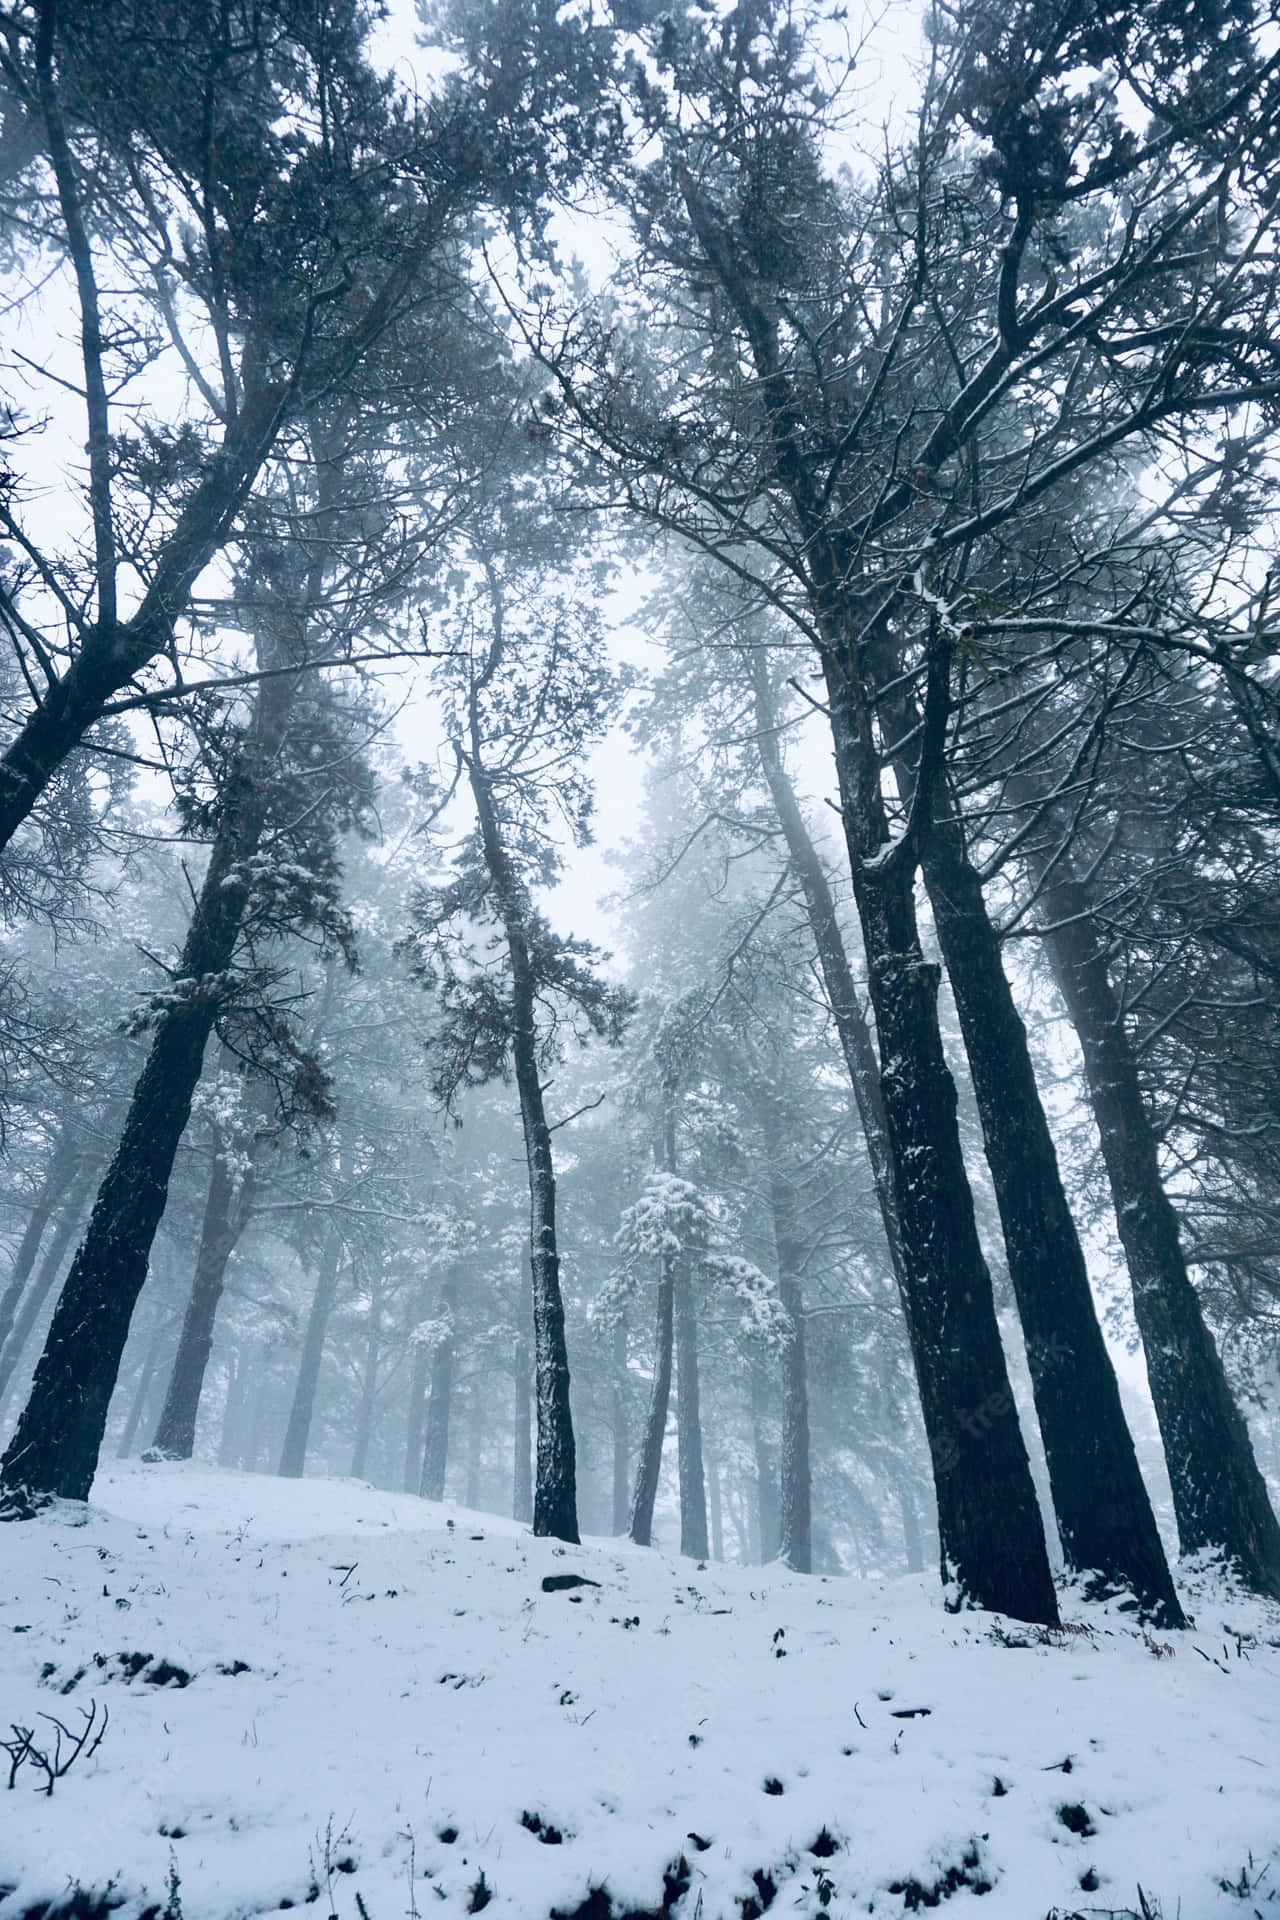 Explore the Beauty of a Snowy Winter Forest